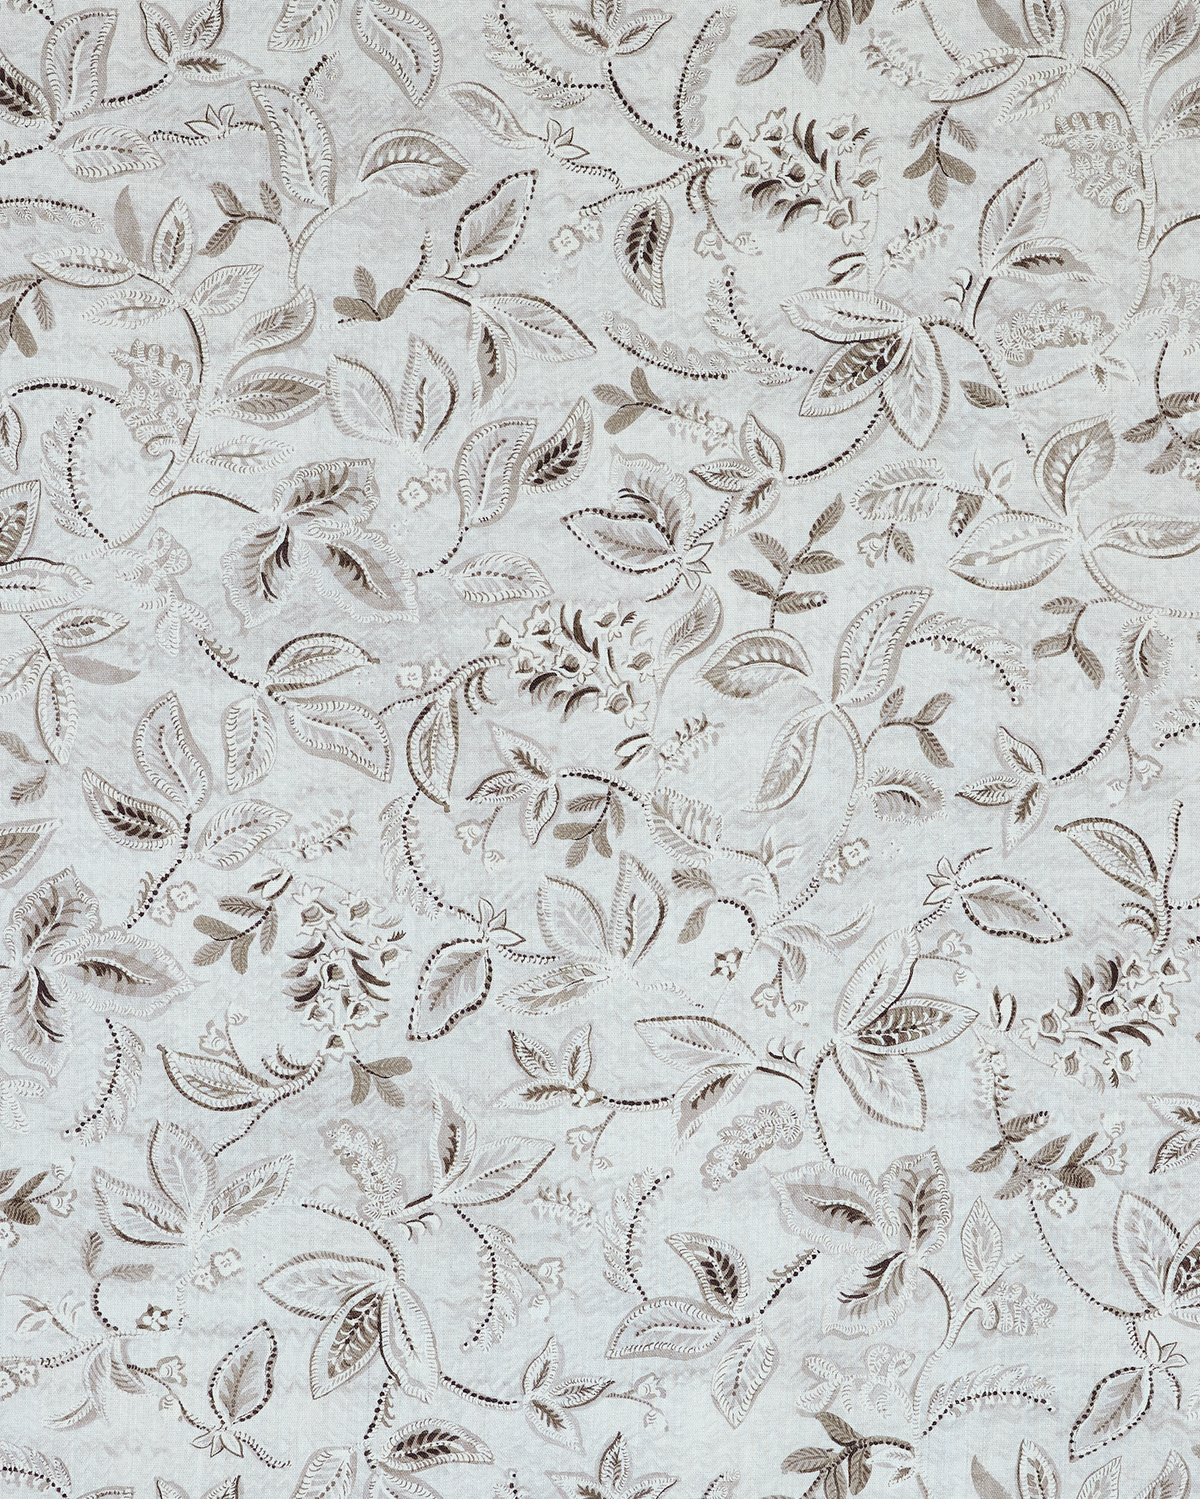 Textured Botanical Fabric in Gray